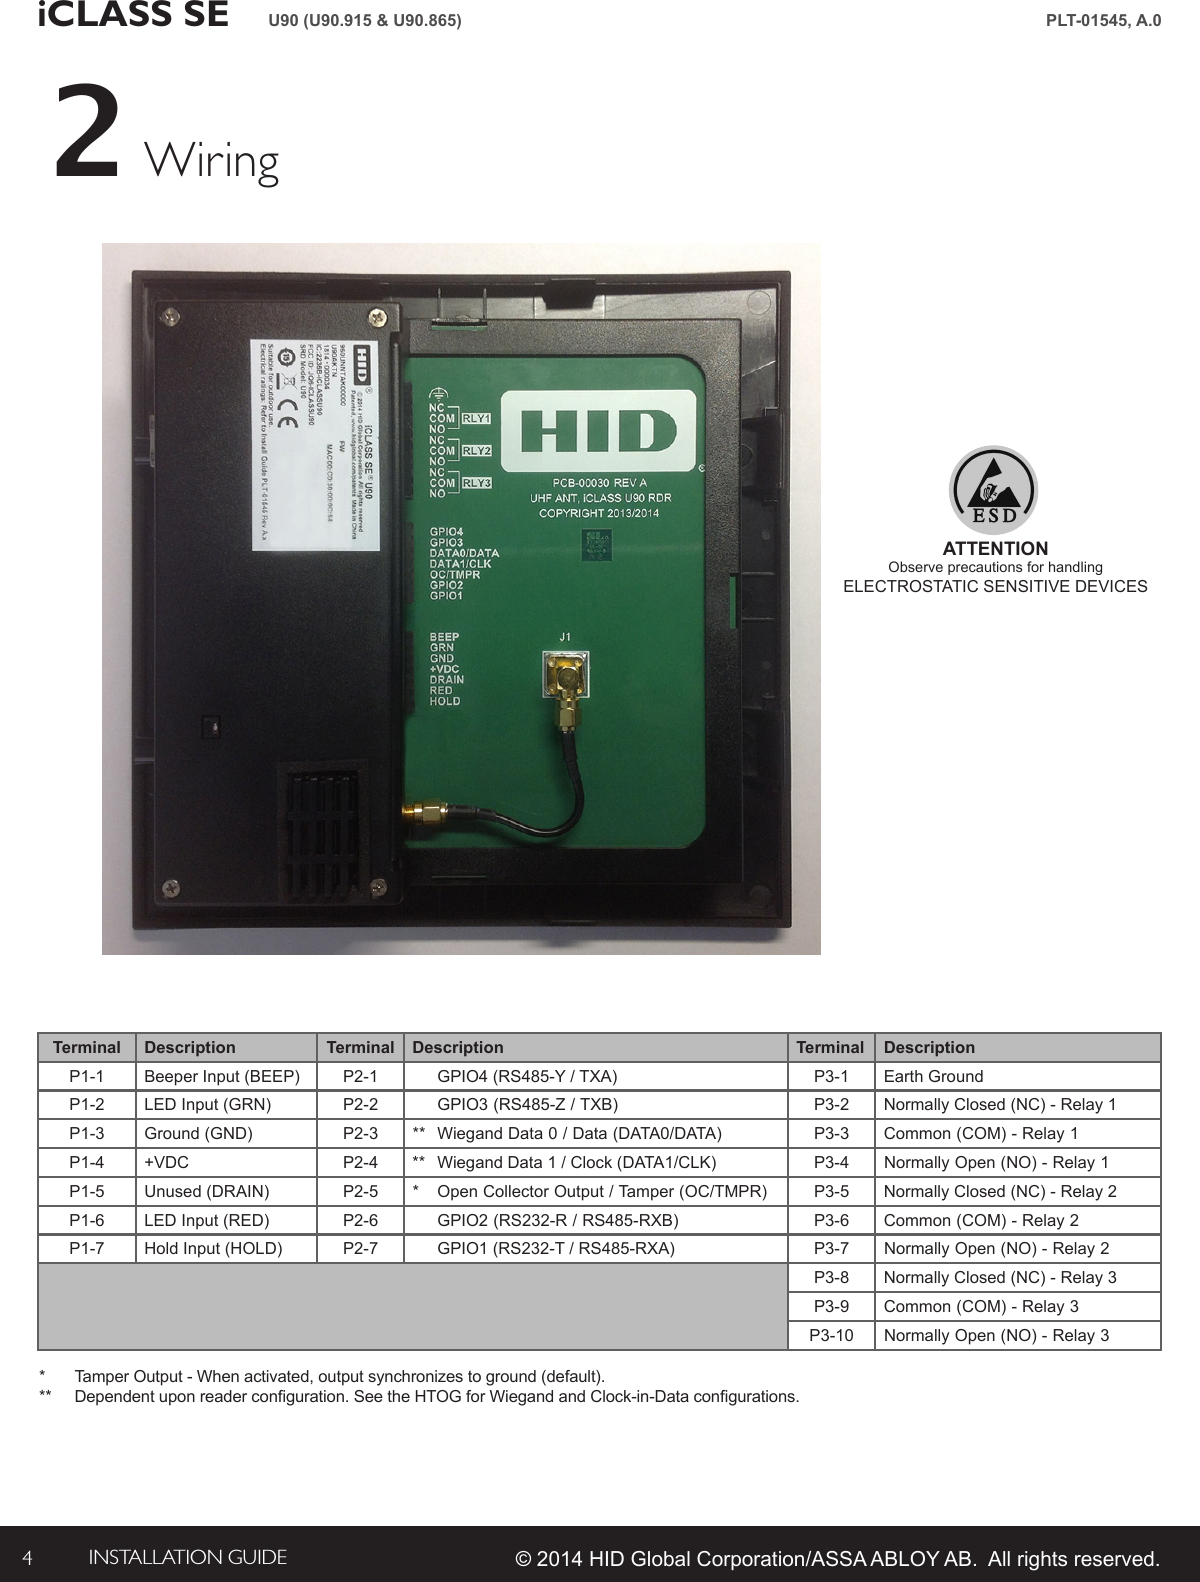 iCLASS SE INSTALLATION GUIDE4PLT-01545, A.0U90 (U90.915 &amp; U90.865)© 2014 HID Global Corporation/ASSA ABLOY AB.  All rights reserved.ATTENTIONObserve precautions for handlingELECTROSTATIC SENSITIVE DEVICESWiring2*  Tamper Output - When activated, output synchronizes to ground (default).**  Dependent upon reader conguration. See the HTOG for Wiegand and Clock-in-Data congurations.Terminal Description Terminal Description Terminal DescriptionP1-1 Beeper Input (BEEP) P2-1   GPIO4 (RS485-Y / TXA)  P3-1 Earth GroundP1-2 LED Input (GRN) P2-2   GPIO3 (RS485-Z / TXB)  P3-2 Normally Closed (NC) - Relay 1P1-3 Ground (GND) P2-3 **  Wiegand Data 0 / Data (DATA0/DATA) P3-3 Common (COM) - Relay 1P1-4 +VDC P2-4 **  Wiegand Data 1 / Clock (DATA1/CLK) P3-4 Normally Open (NO) - Relay 1P1-5 Unused (DRAIN) P2-5 *  Open Collector Output / Tamper (OC/TMPR) P3-5 Normally Closed (NC) - Relay 2P1-6 LED Input (RED) P2-6   GPIO2 (RS232-R / RS485-RXB) P3-6 Common (COM) - Relay 2P1-7 Hold Input (HOLD) P2-7   GPIO1 (RS232-T / RS485-RXA) P3-7 Normally Open (NO) - Relay 2P3-8 Normally Closed (NC) - Relay 3P3-9 Common (COM) - Relay 3P3-10 Normally Open (NO) - Relay 3